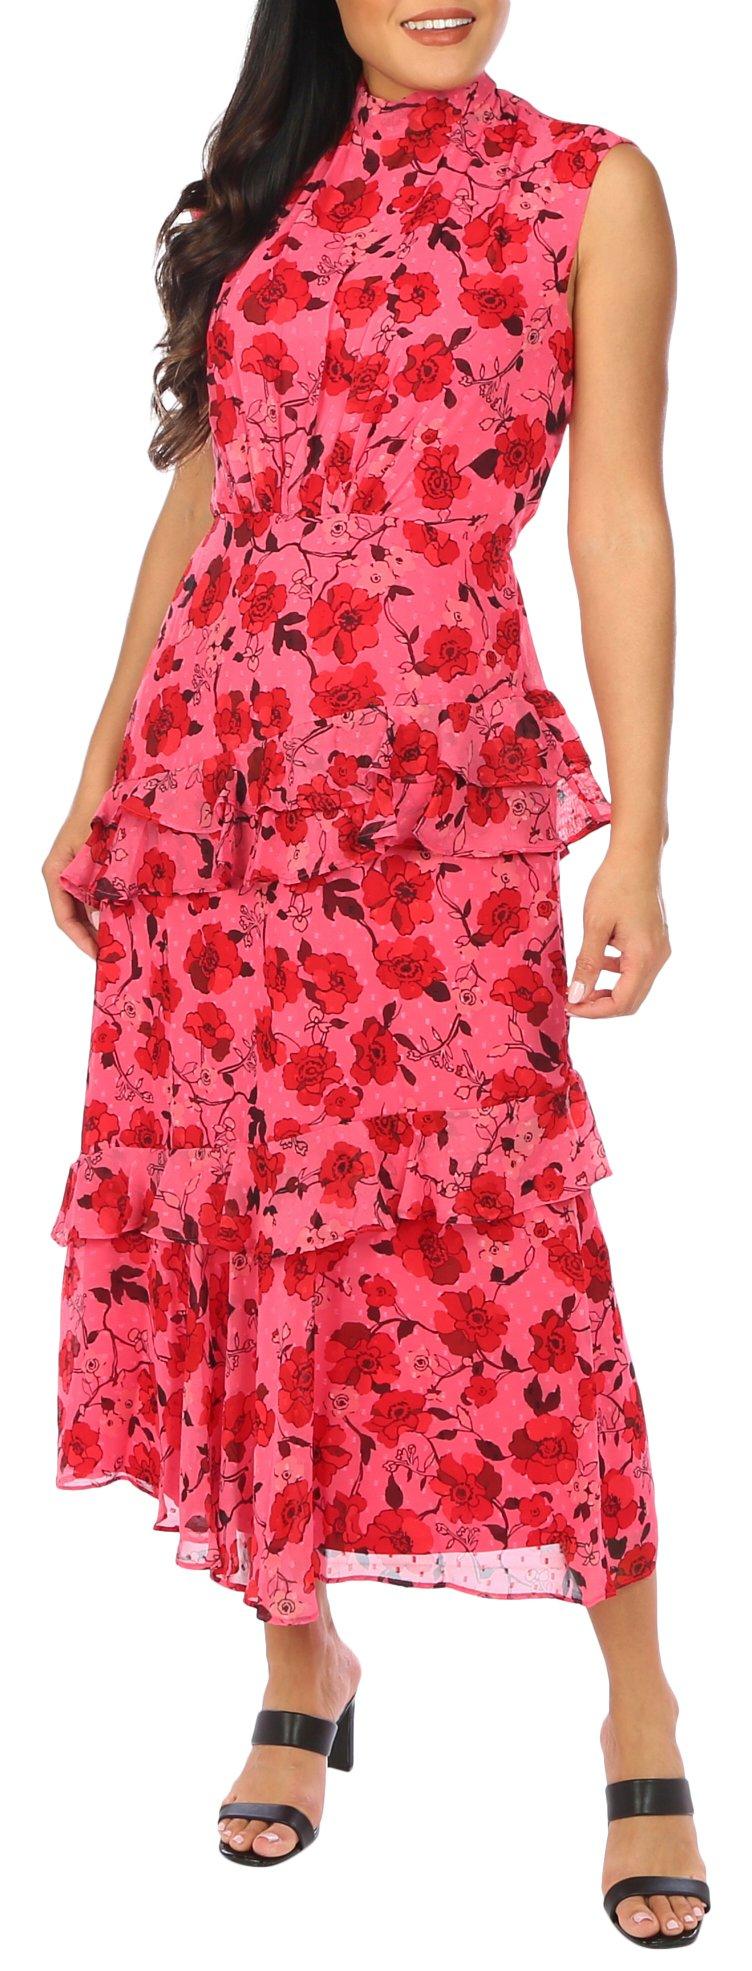 Womens Floral Tiered Sleeveless Dress